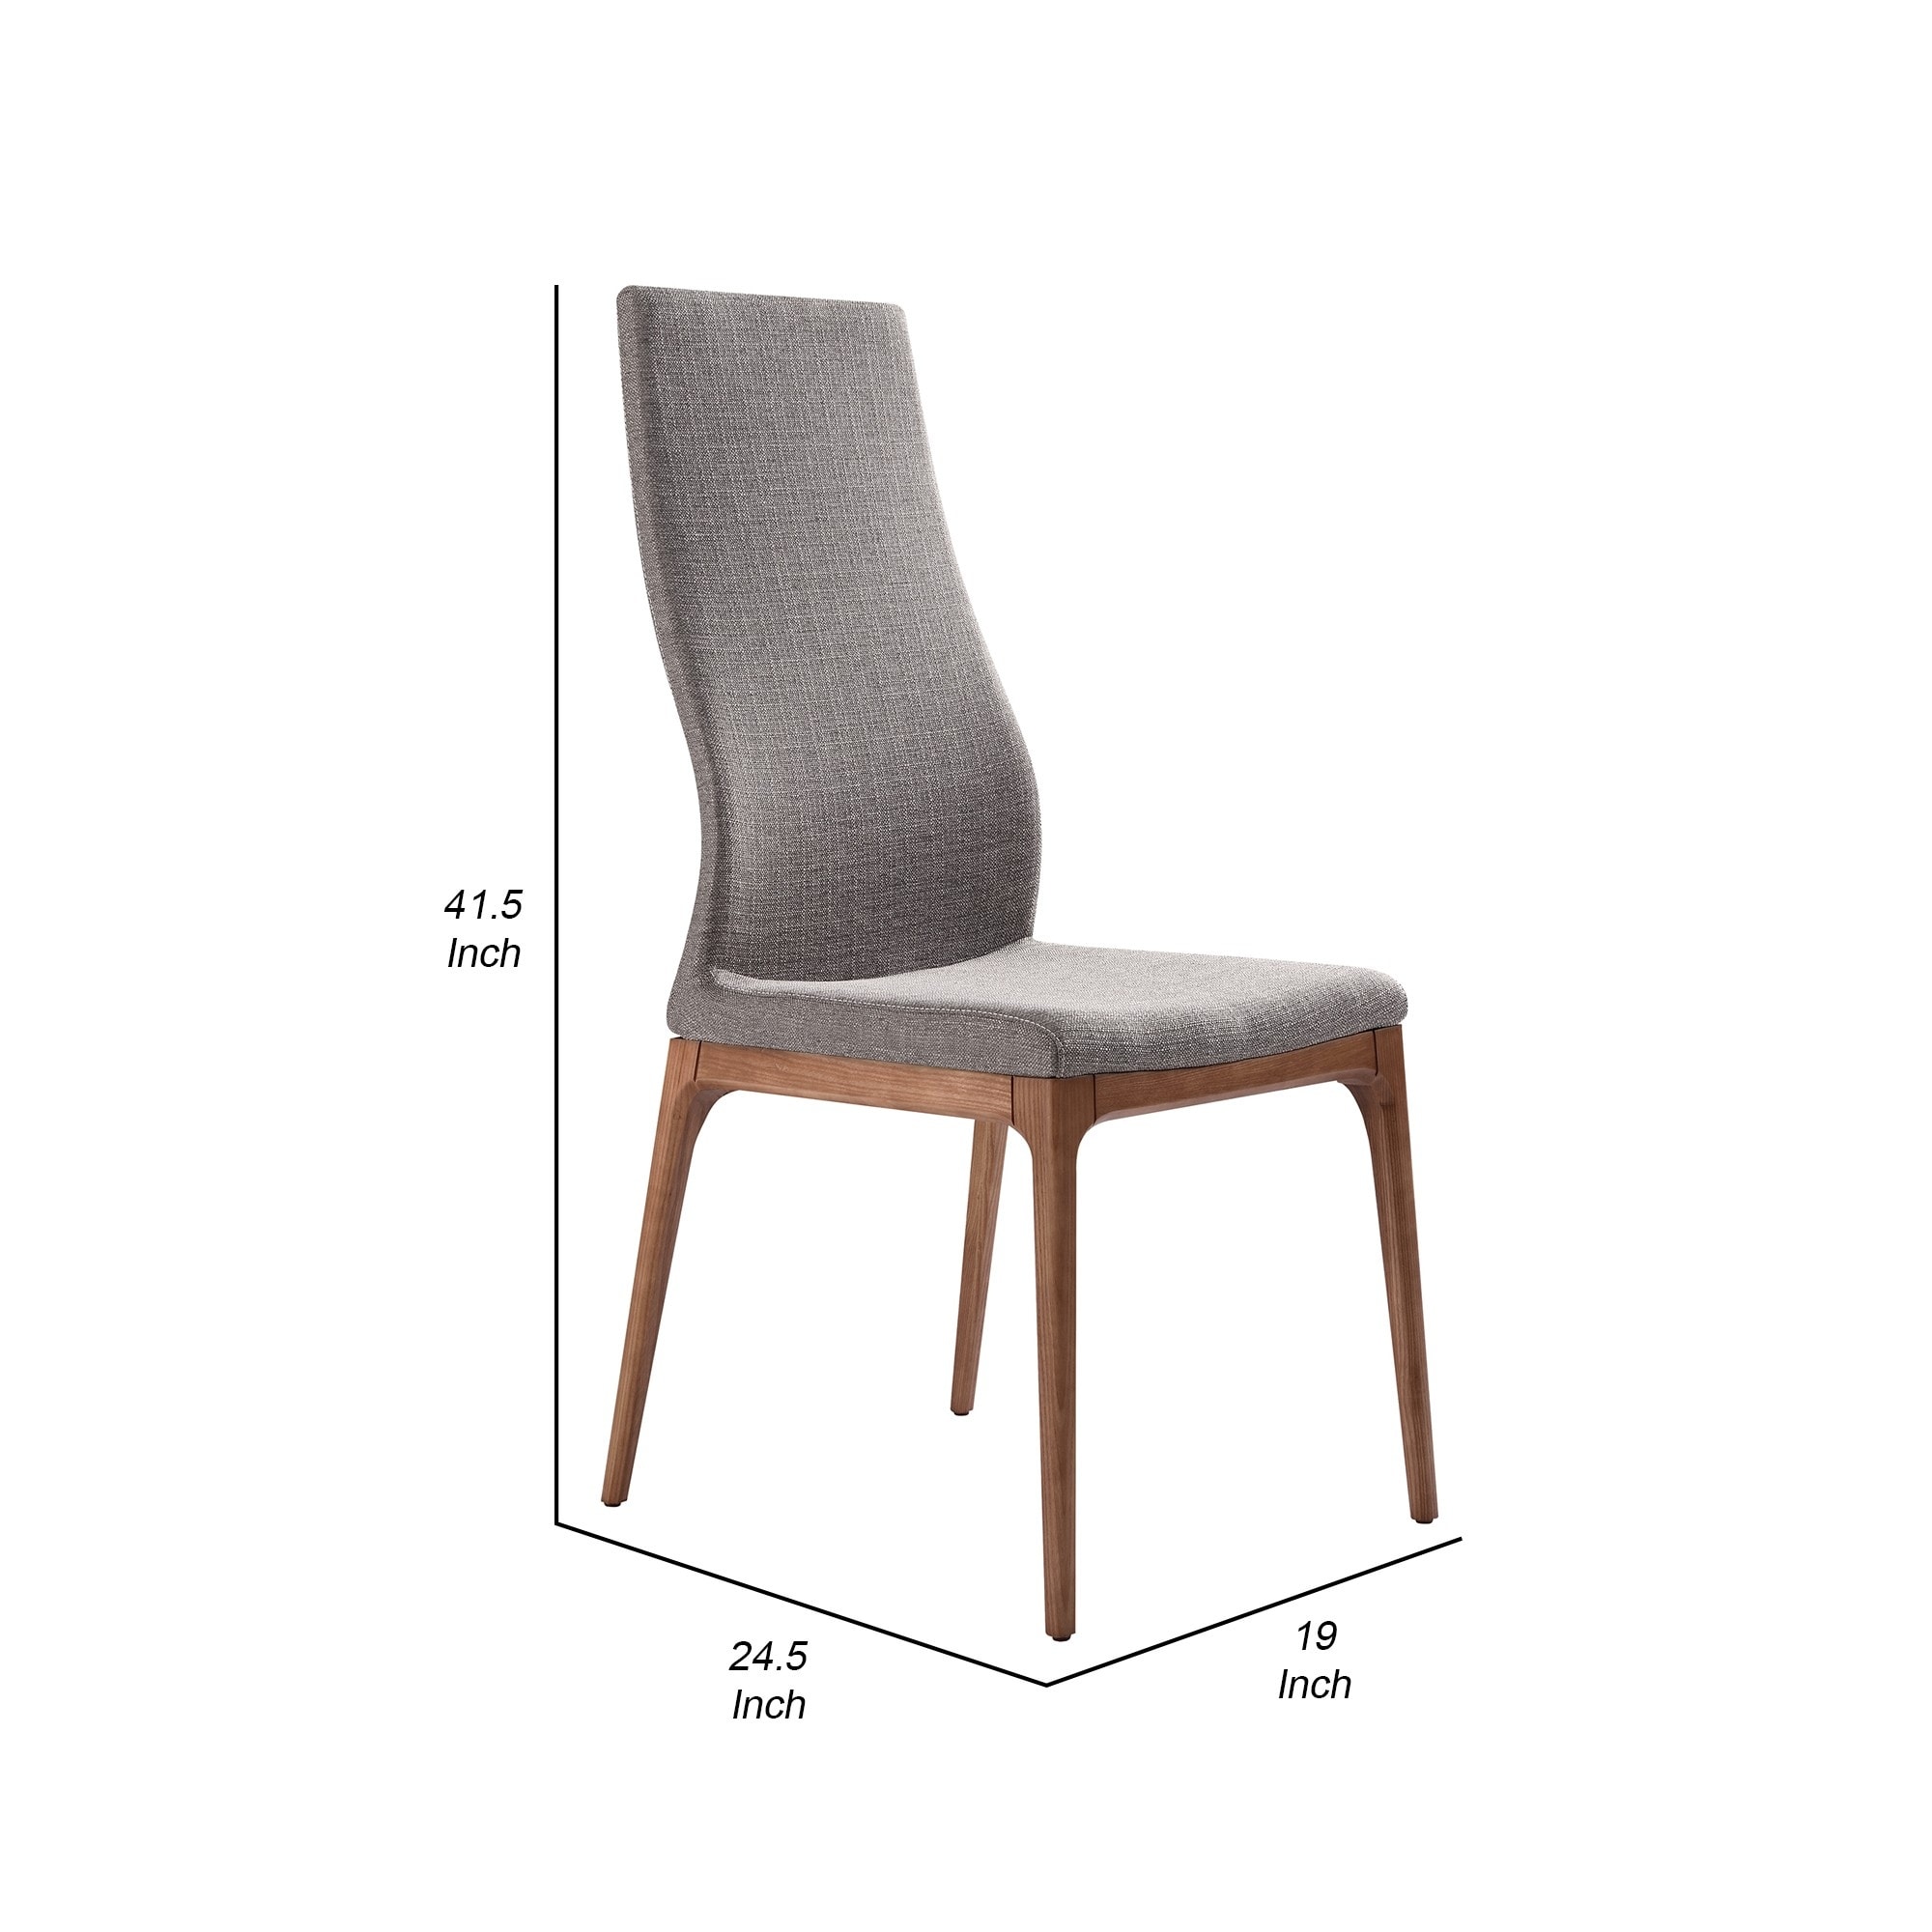 https://ak1.ostkcdn.com/images/products/is/images/direct/7544a5390ef3ab12879d2ef41b562875b77f82a6/Fabric-Sloped-Elongated-Back-Dining-Chair-with-Splayed-Legs%2C-Set-of-2%2CGray.jpg